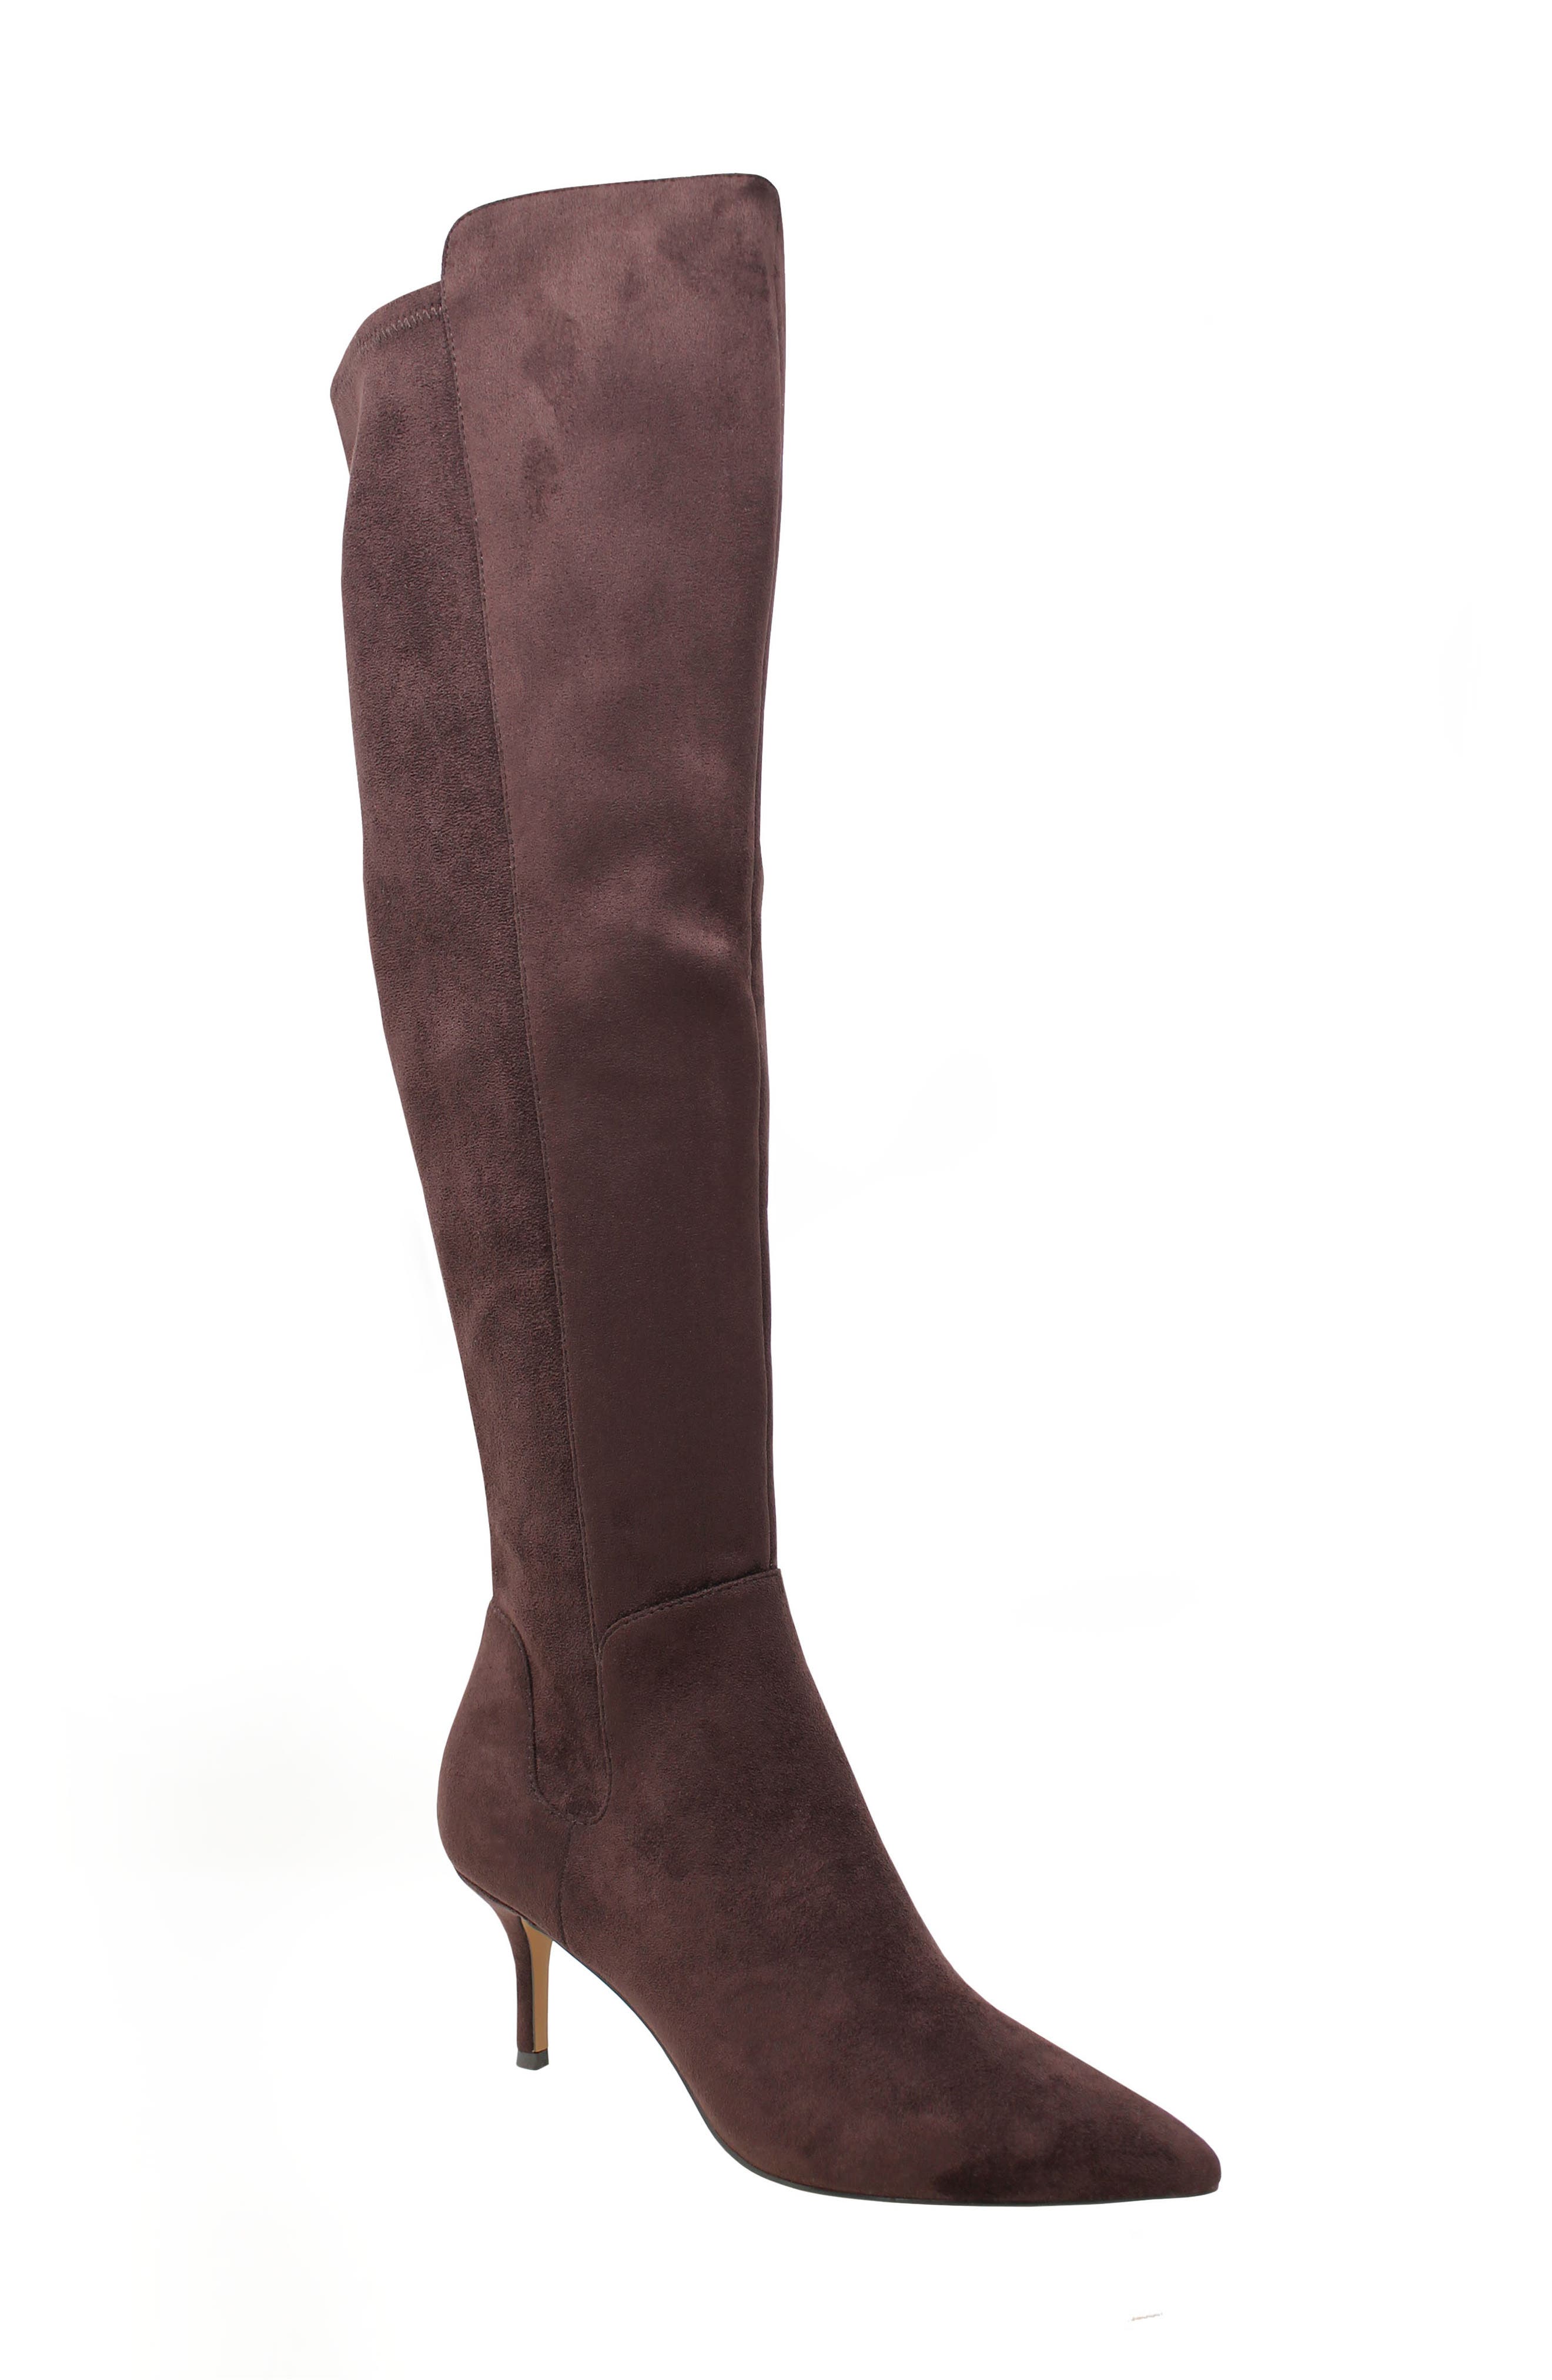 charles by charles david over the knee boot